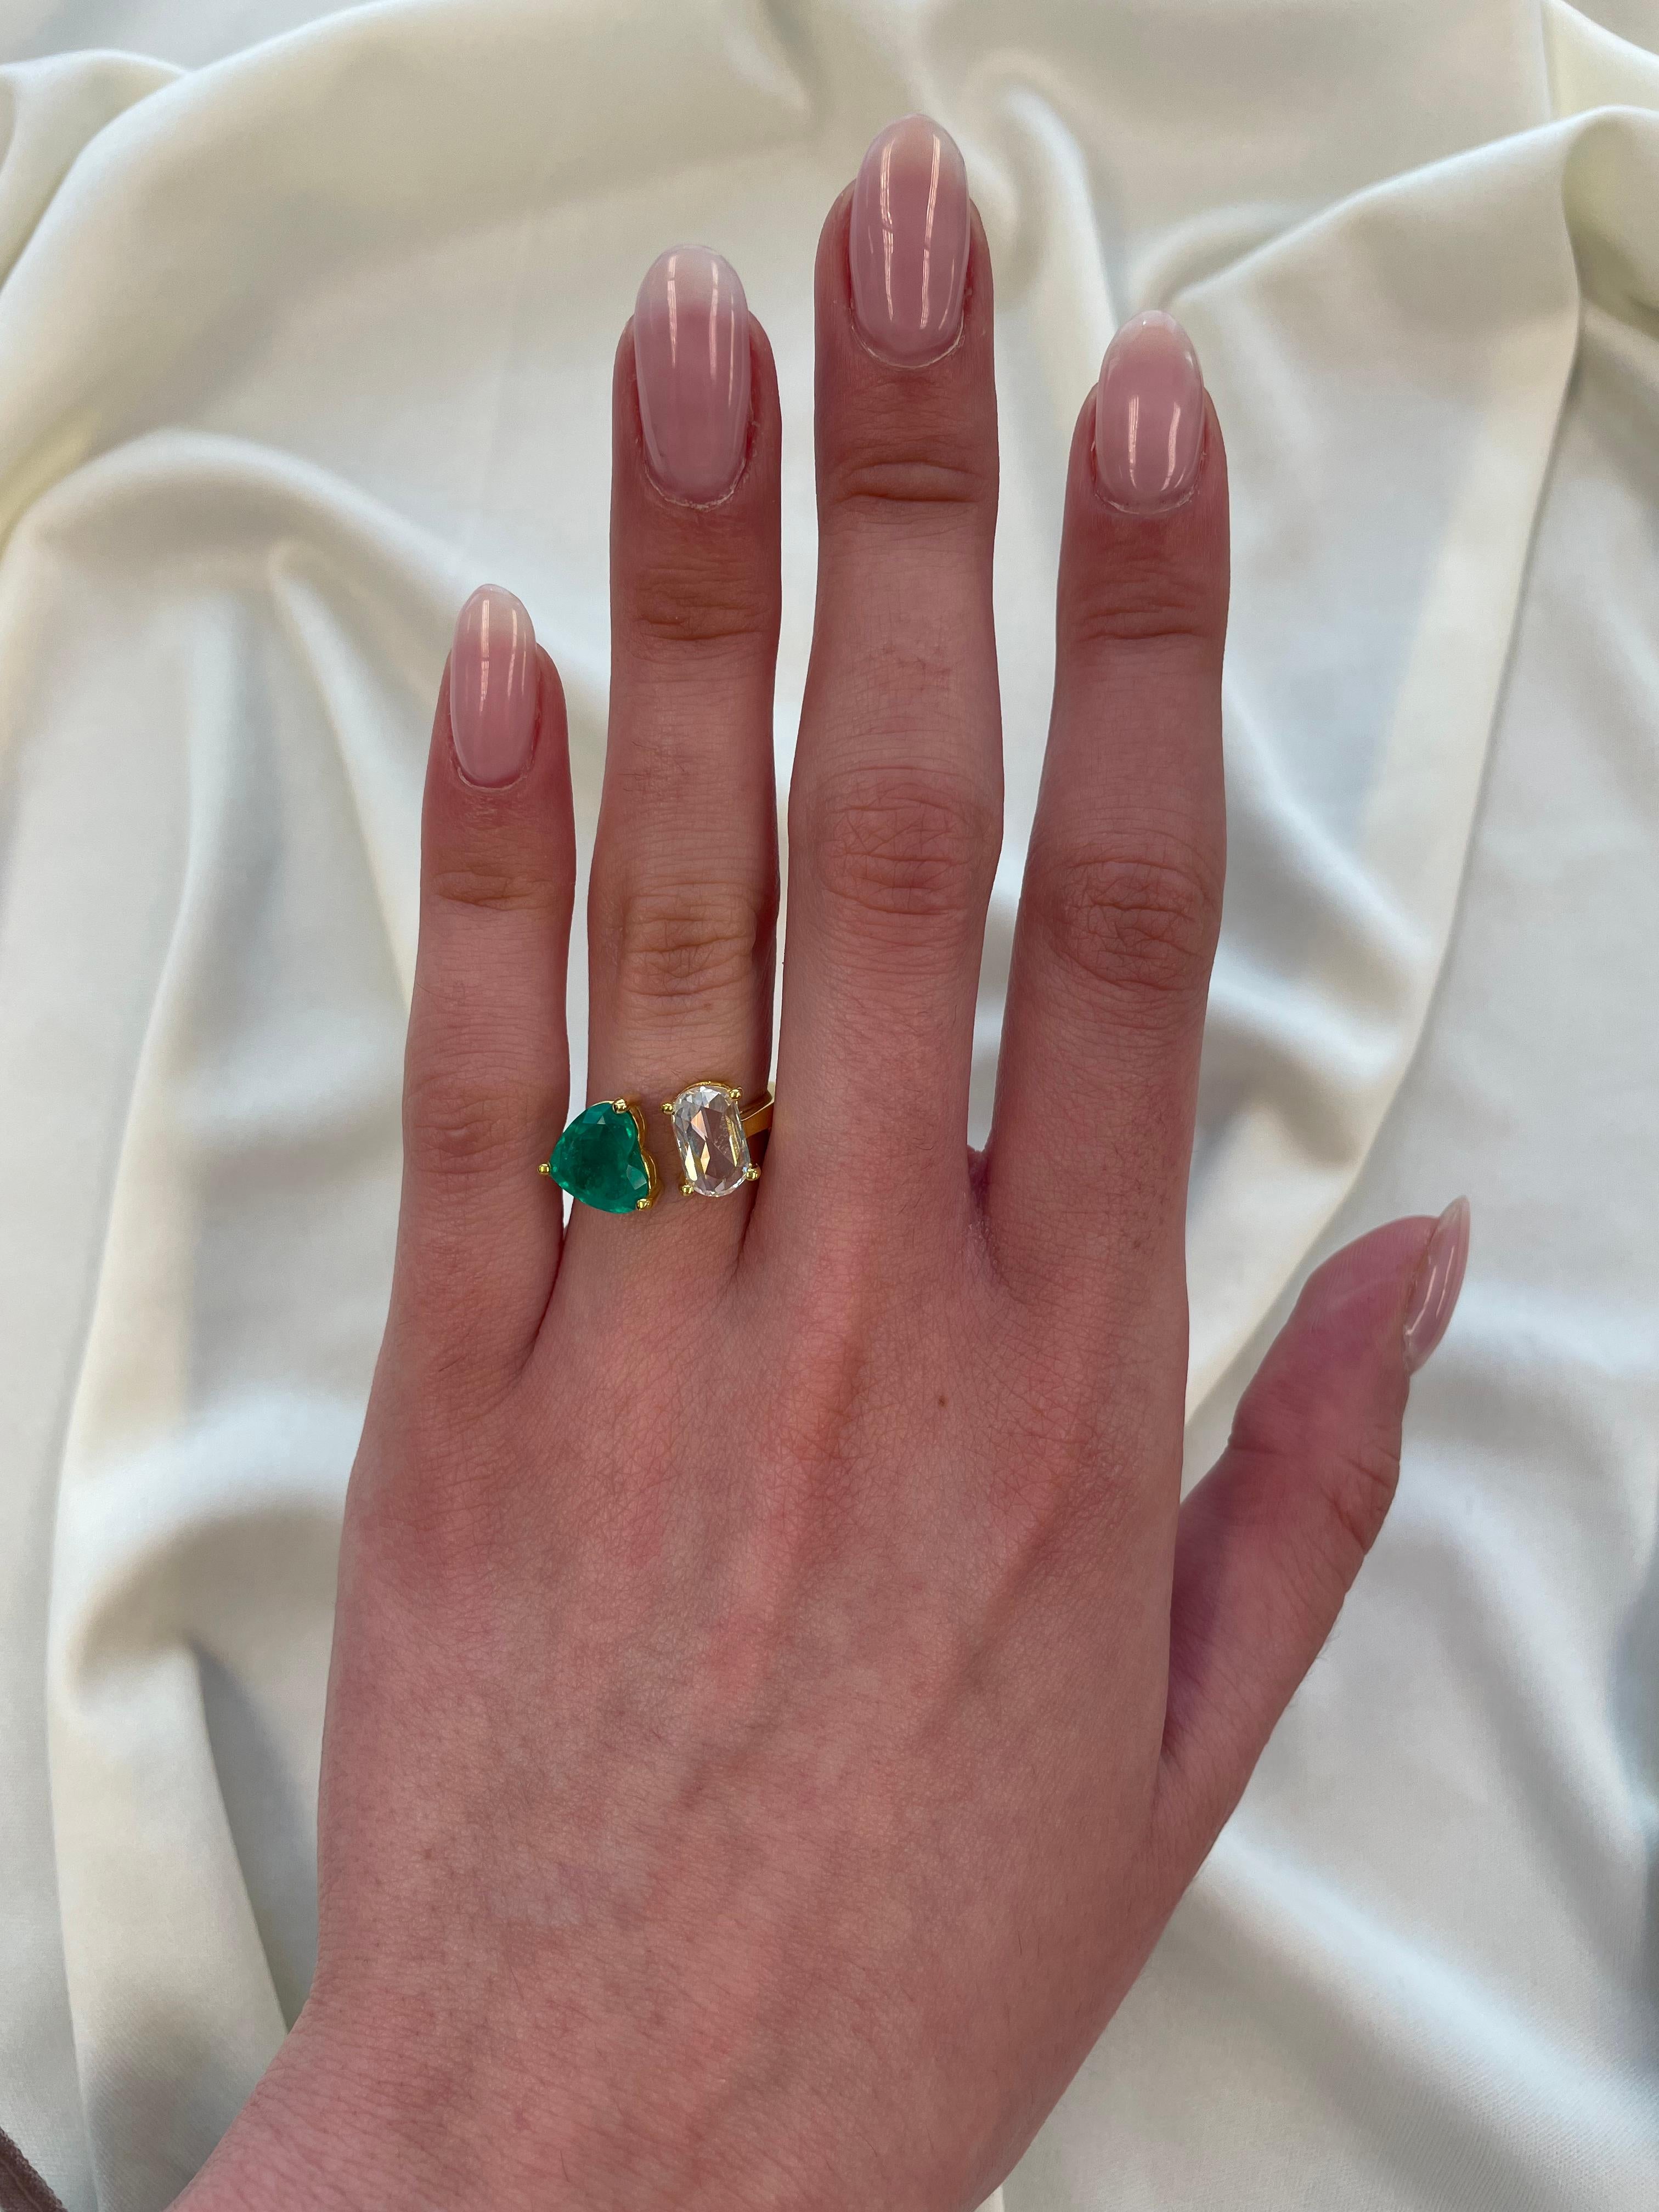 Stunning modern floating emerald and diamond toi et moi ring. By Alexander Beverly Hills.
1 heart shape emeralds, 1.79 carats apx F2. 1 oval rose cut diamond 1.32 carats, approximately G/H color and vs clarity. 18-karat yellow gold, 5.42 grams,